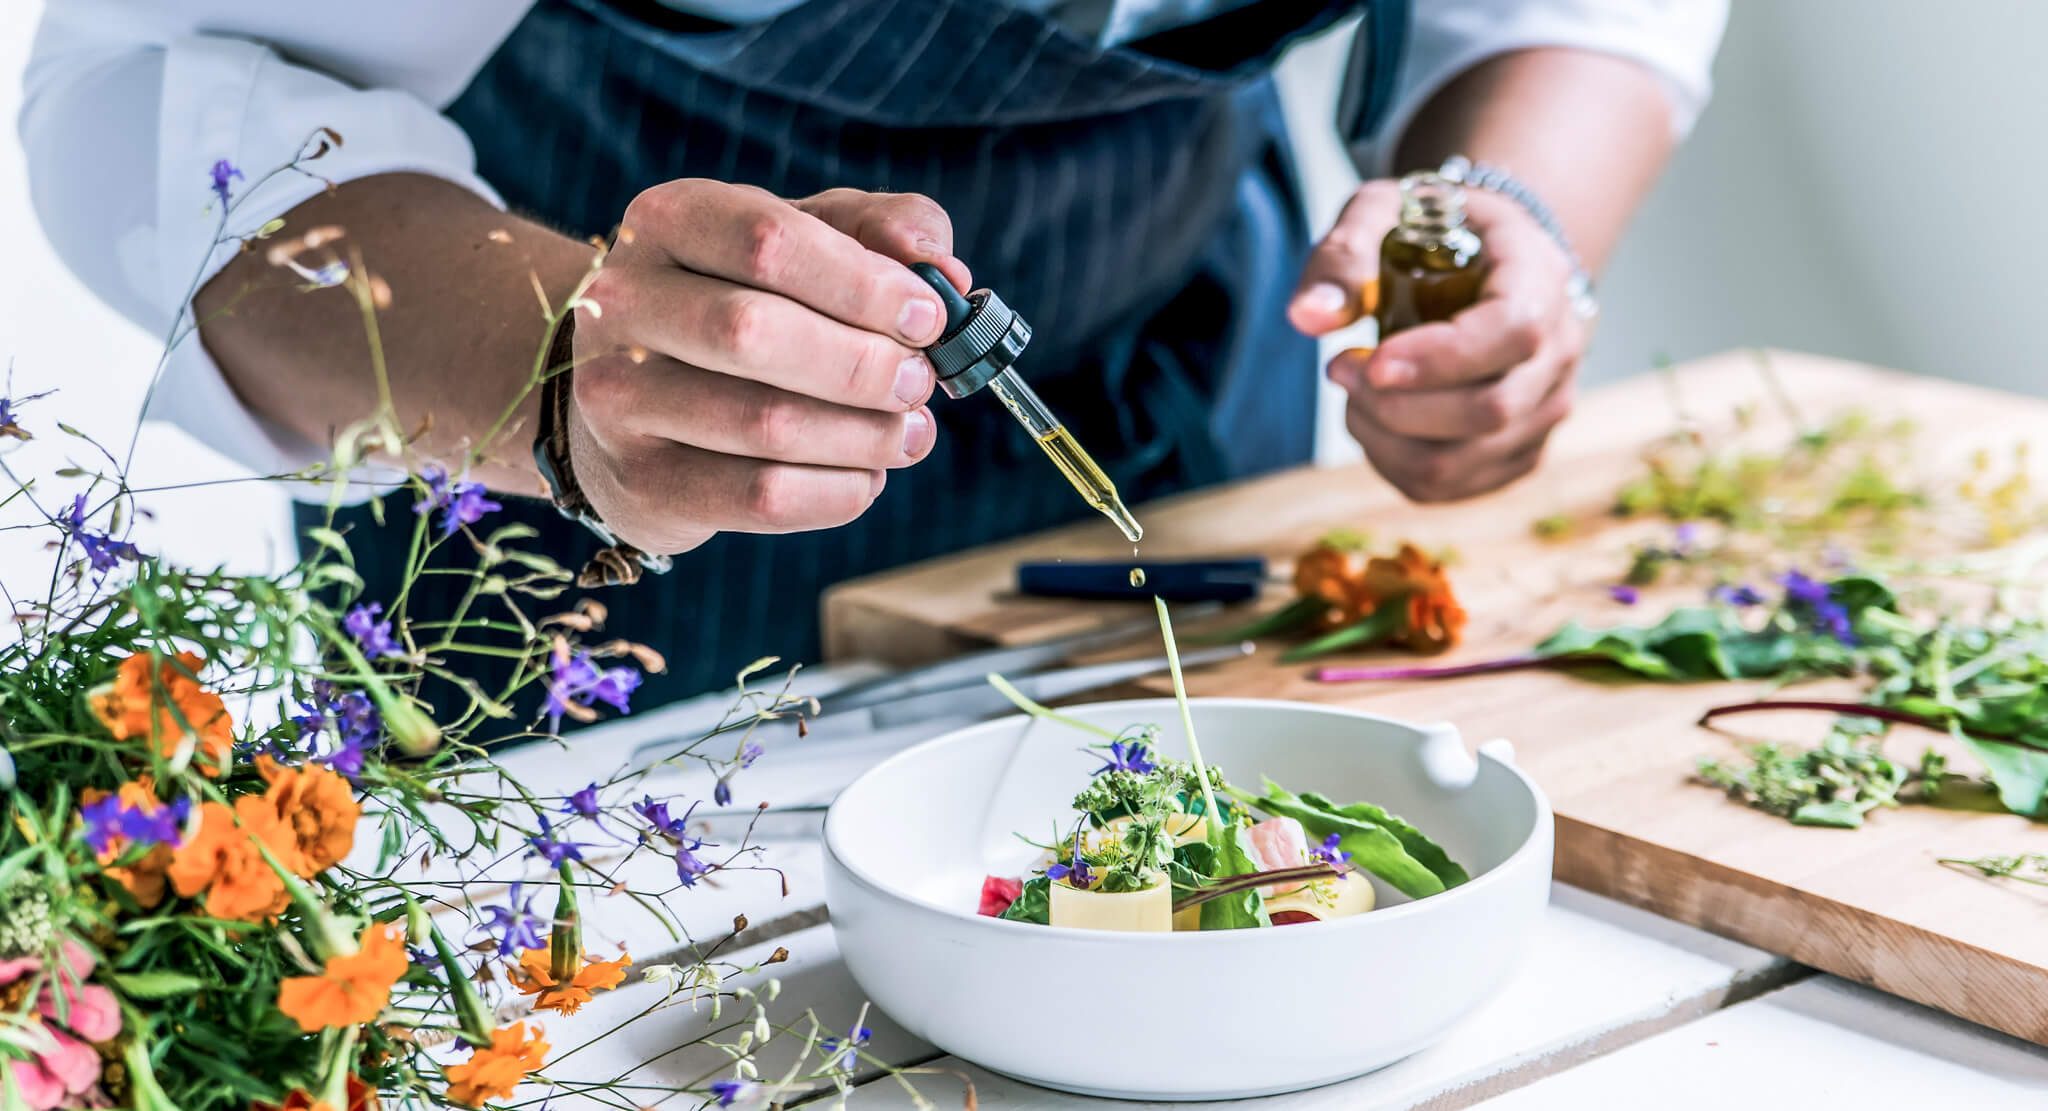 Chef using essential oils to flavour a salad